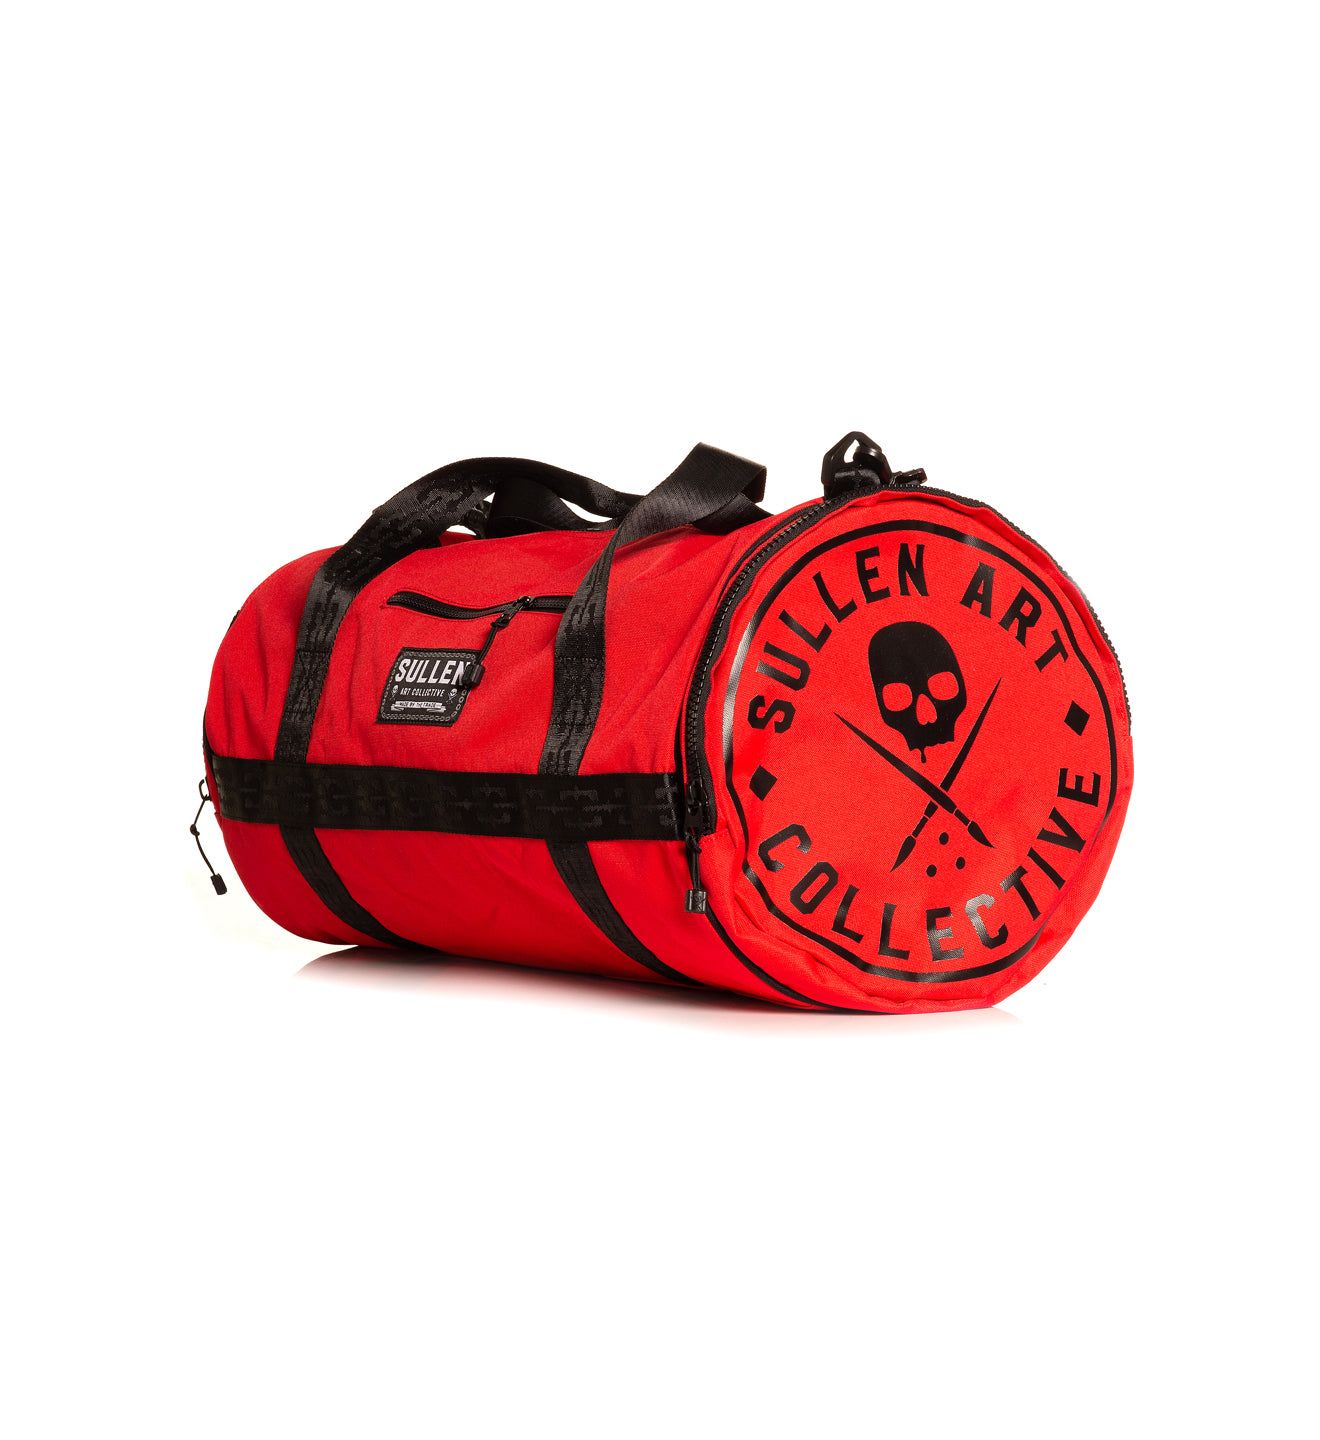 Overnighter Bag Red - XL - 